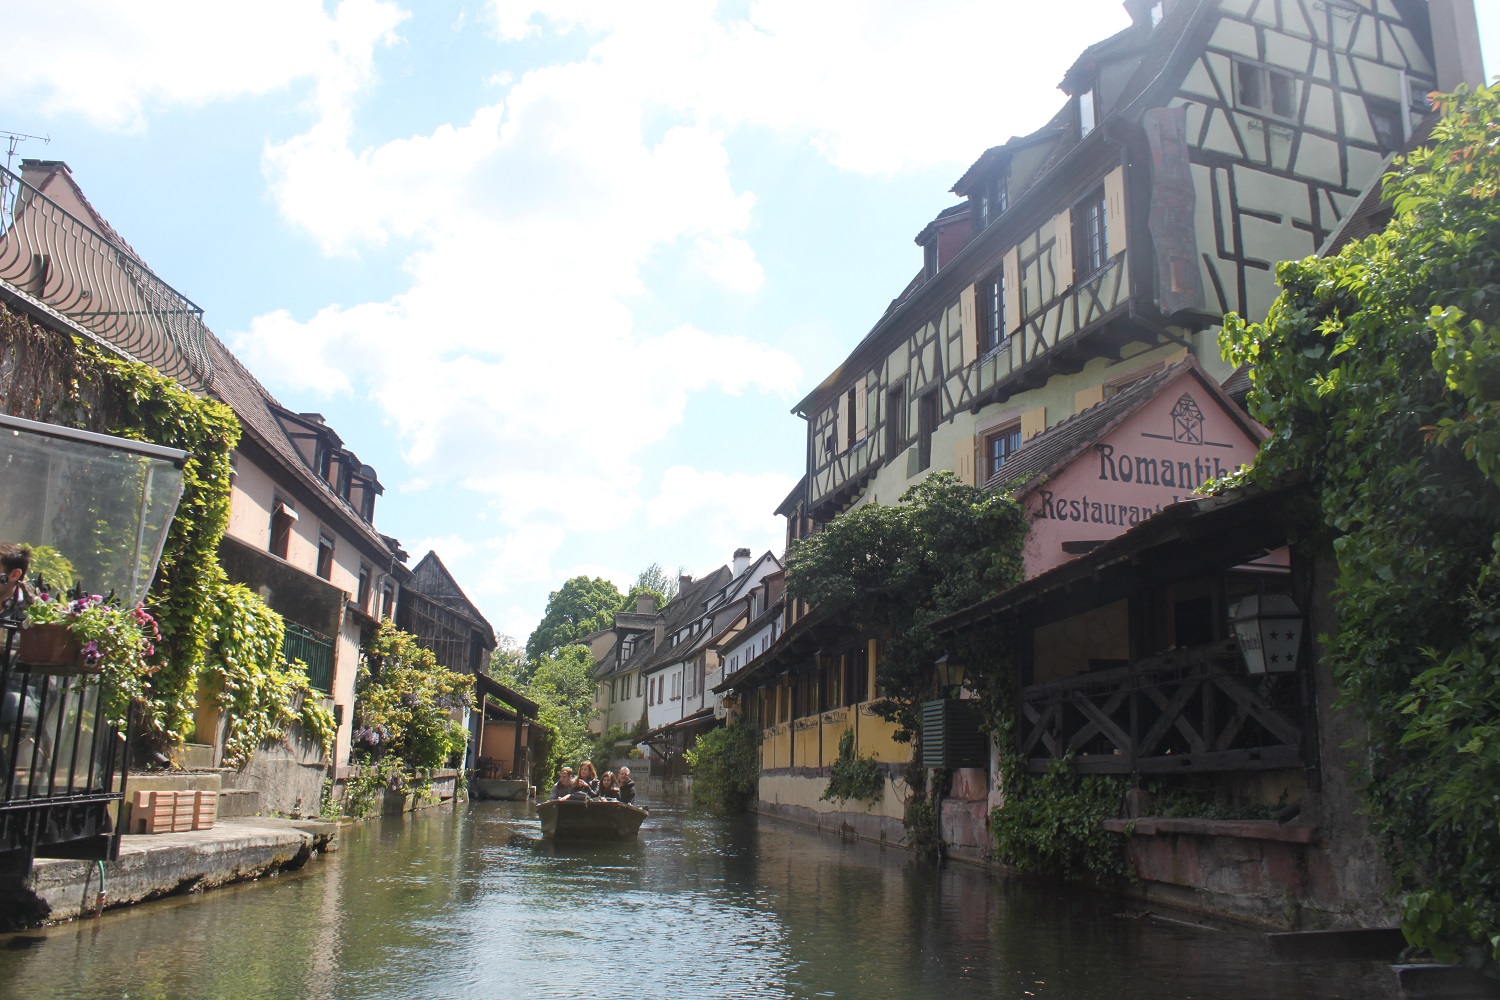 The Canals of Colmar